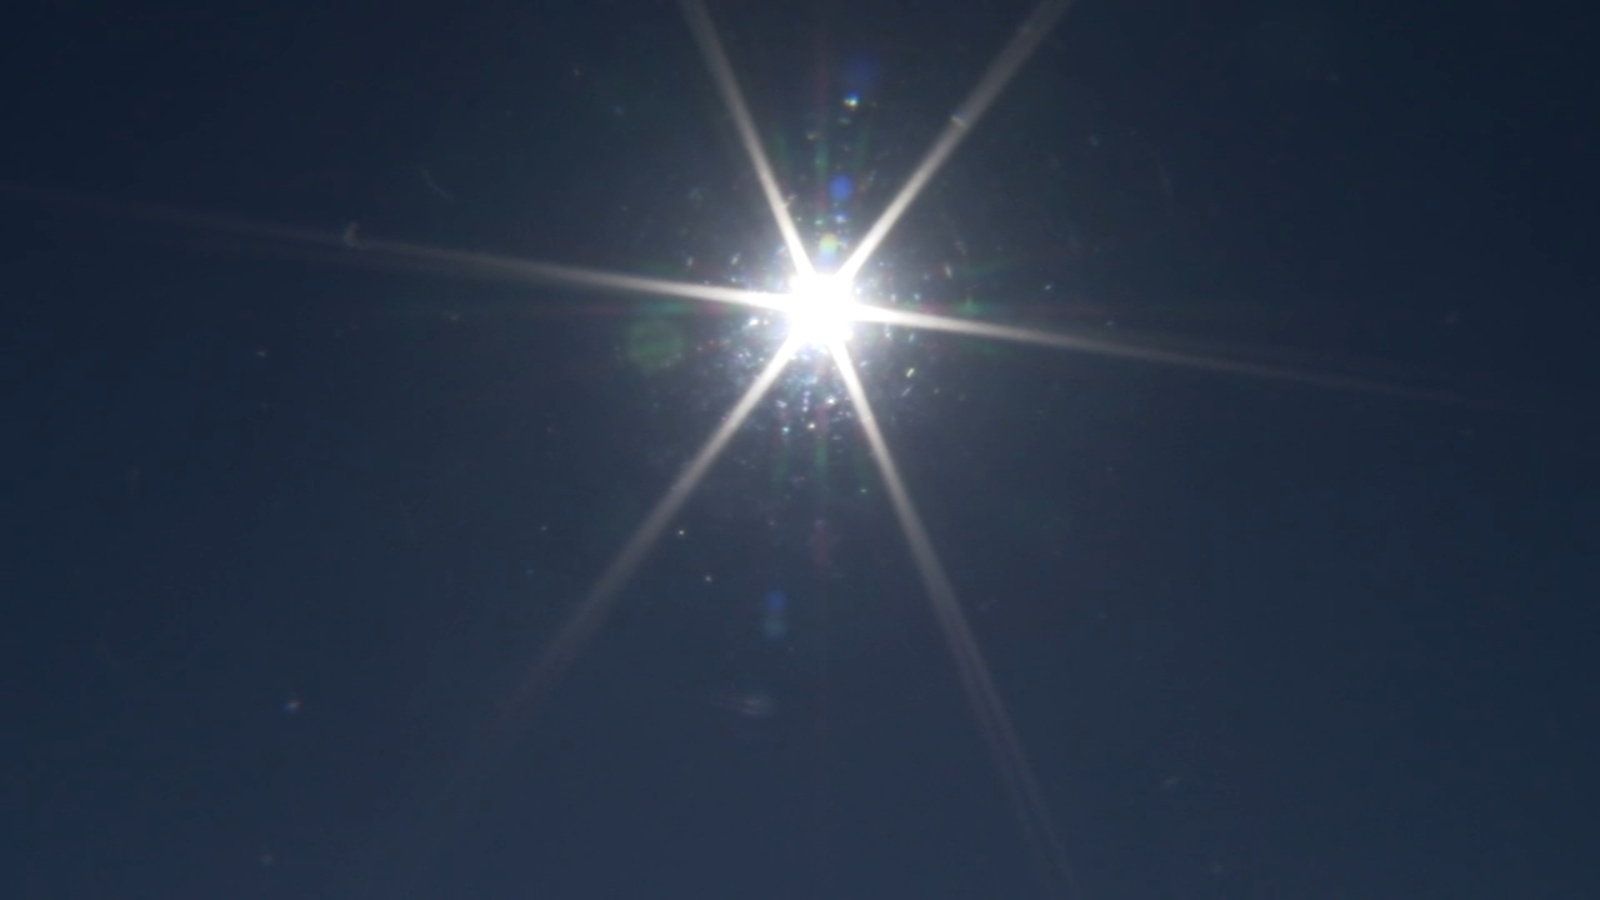 Health leaders urging people to know signs of heat illness [Video]